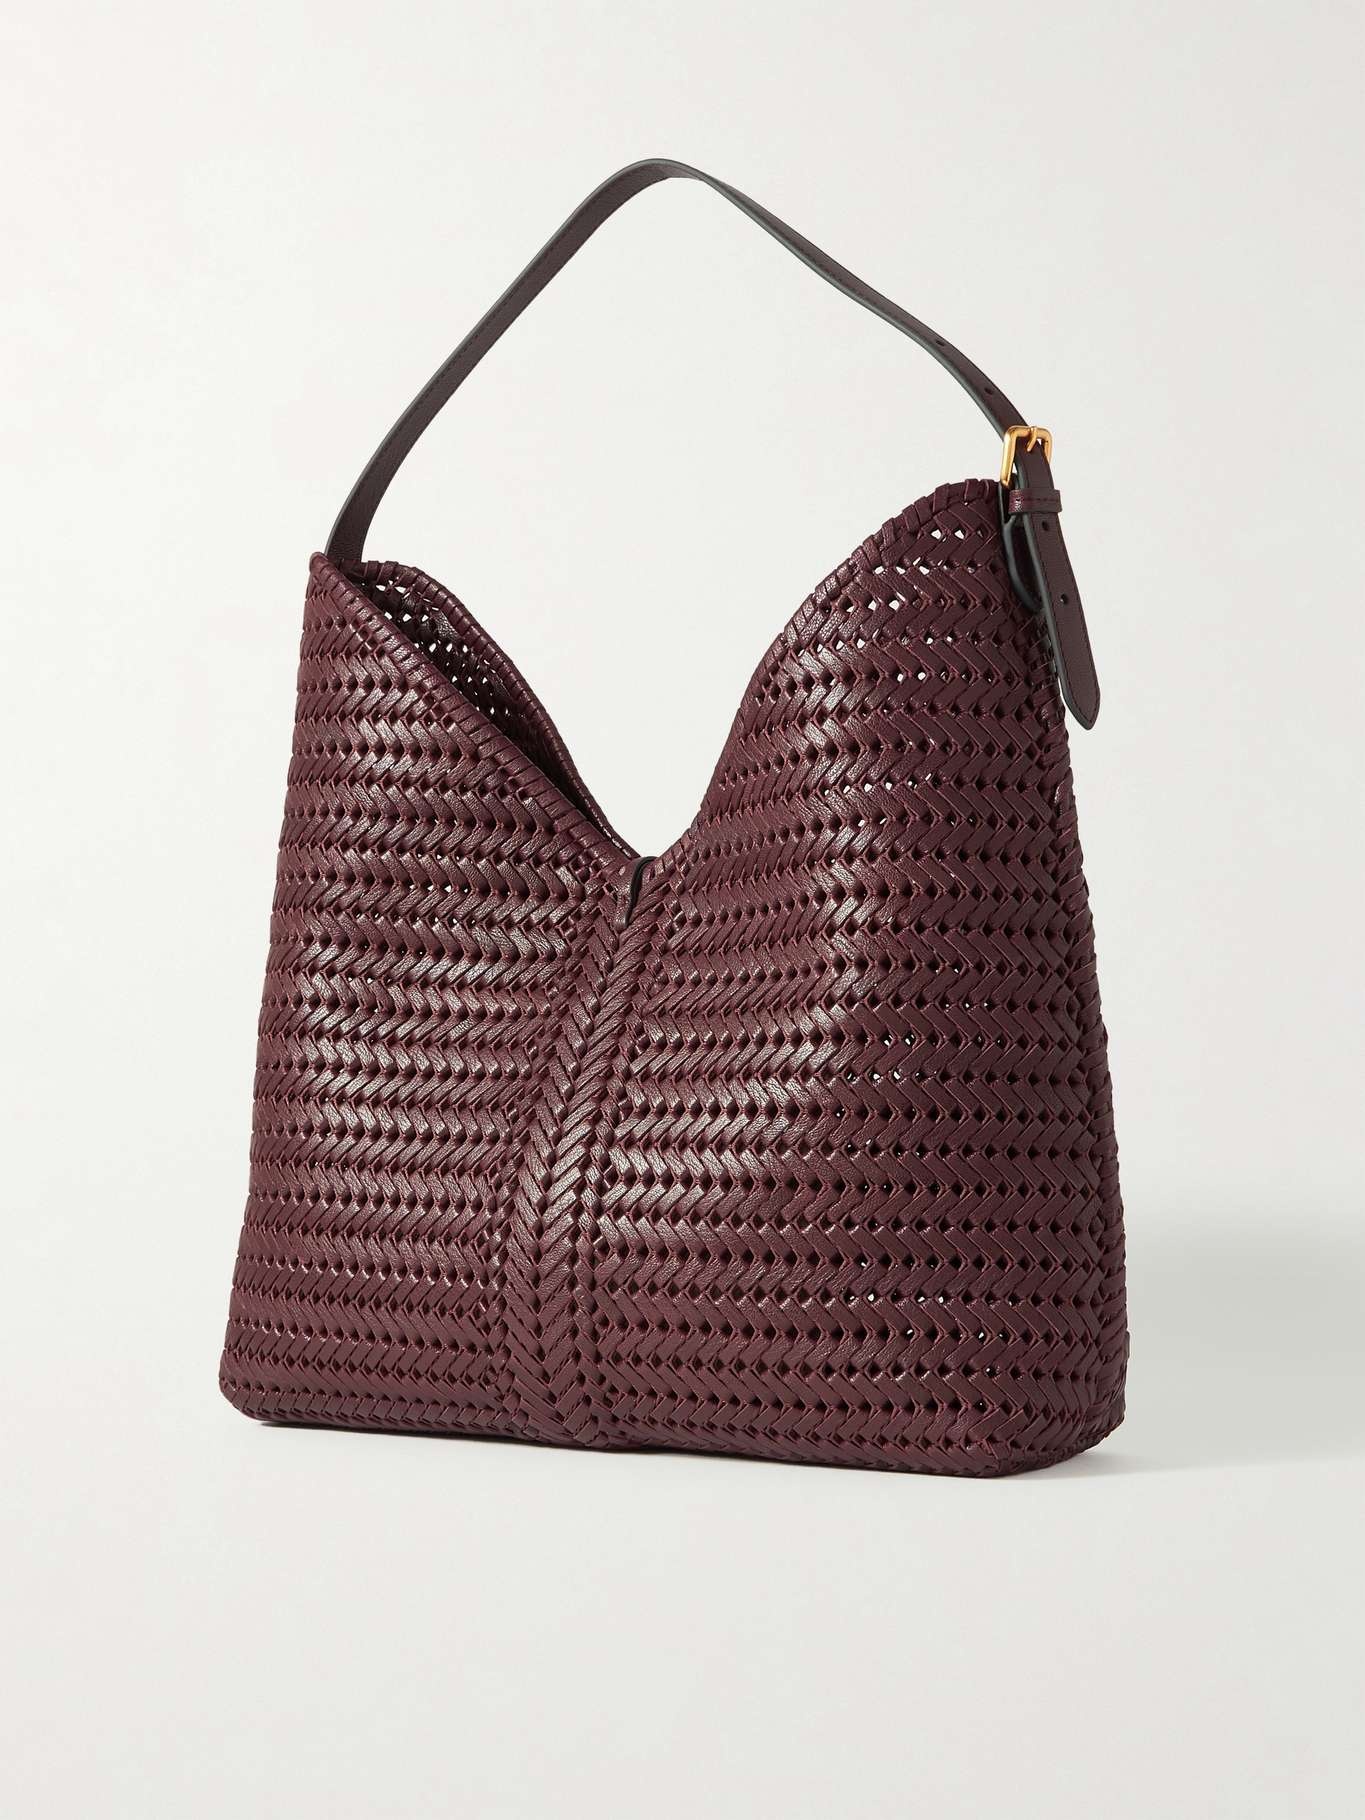 The Neeson tasseled woven leather tote - 3